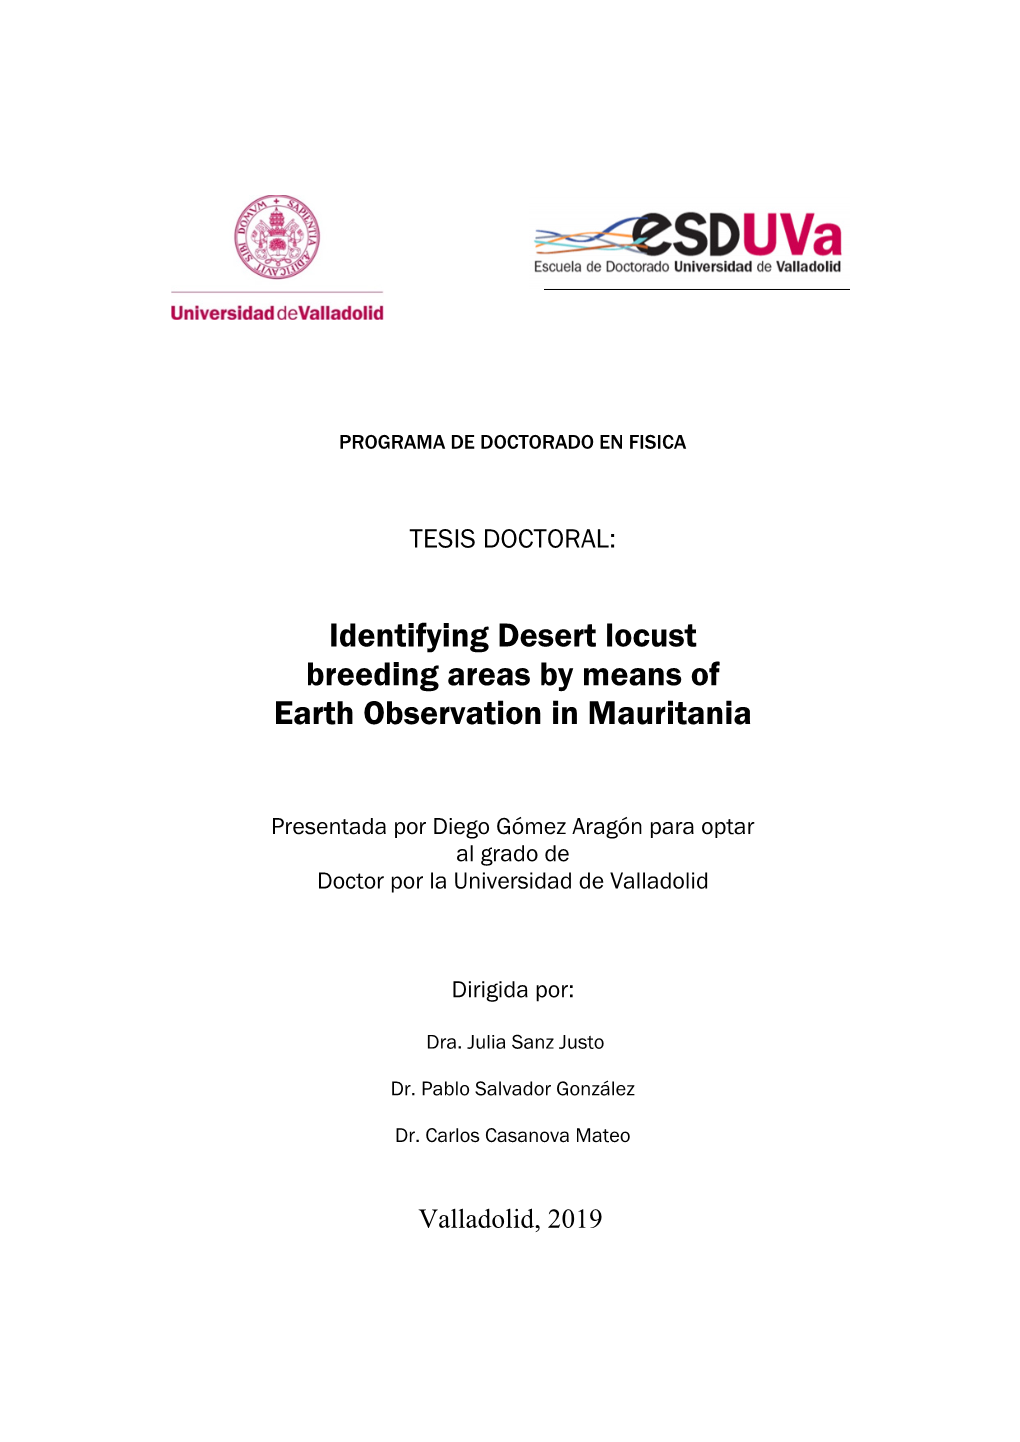 Identifying Desert Locust Breeding Areas by Means of Earth Observation in Mauritania